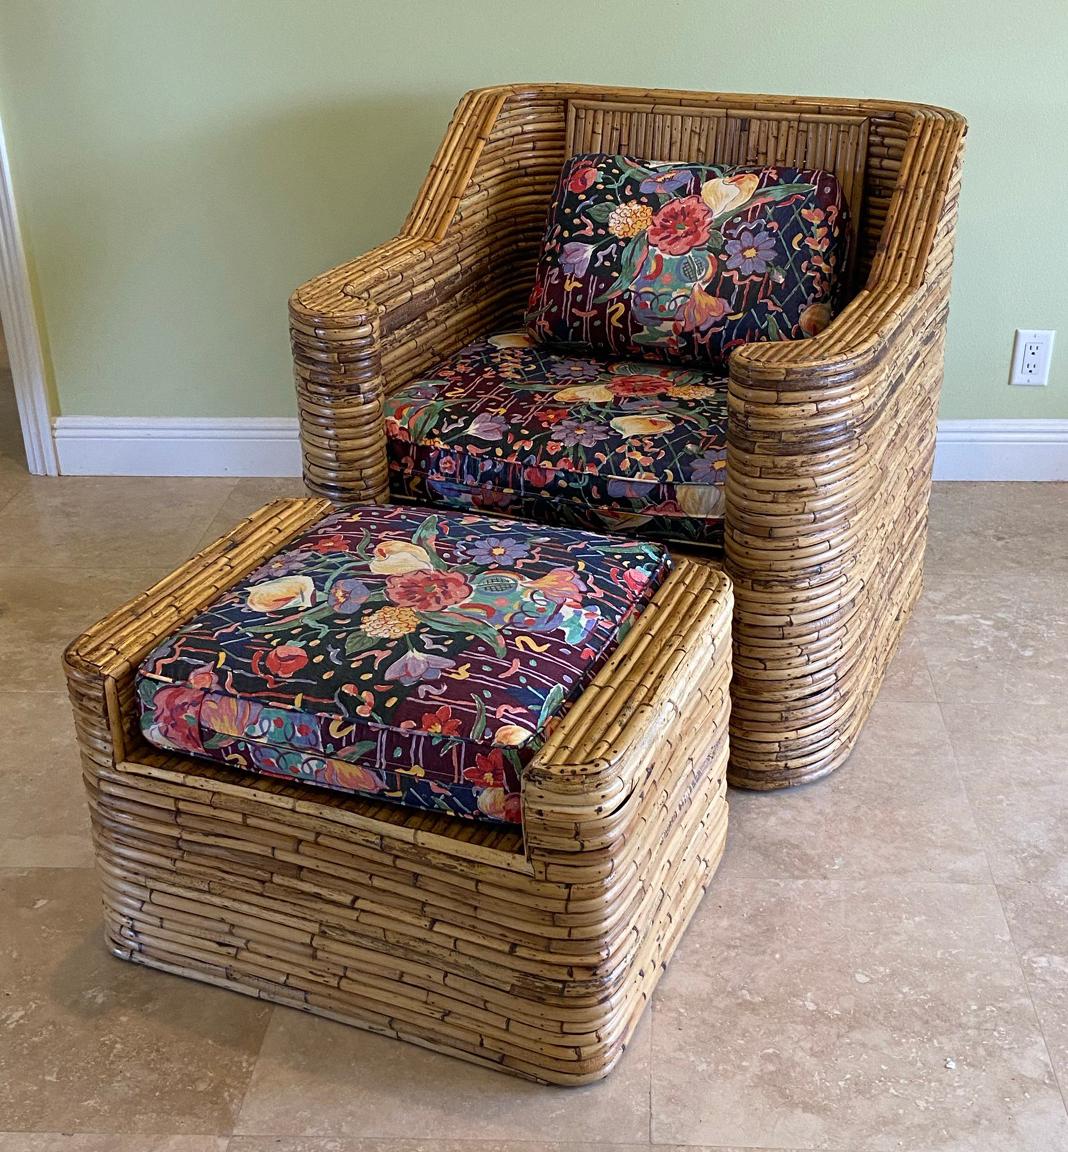 Hollywood Regency period bamboo rattan lounge or club chair Designed in Art Deco style with modern lines. The use of natural rattan gives the chair and ottoman an organic feel. Chair 35.5 inches wide by 33 deep by 34 high -- matching ottoman